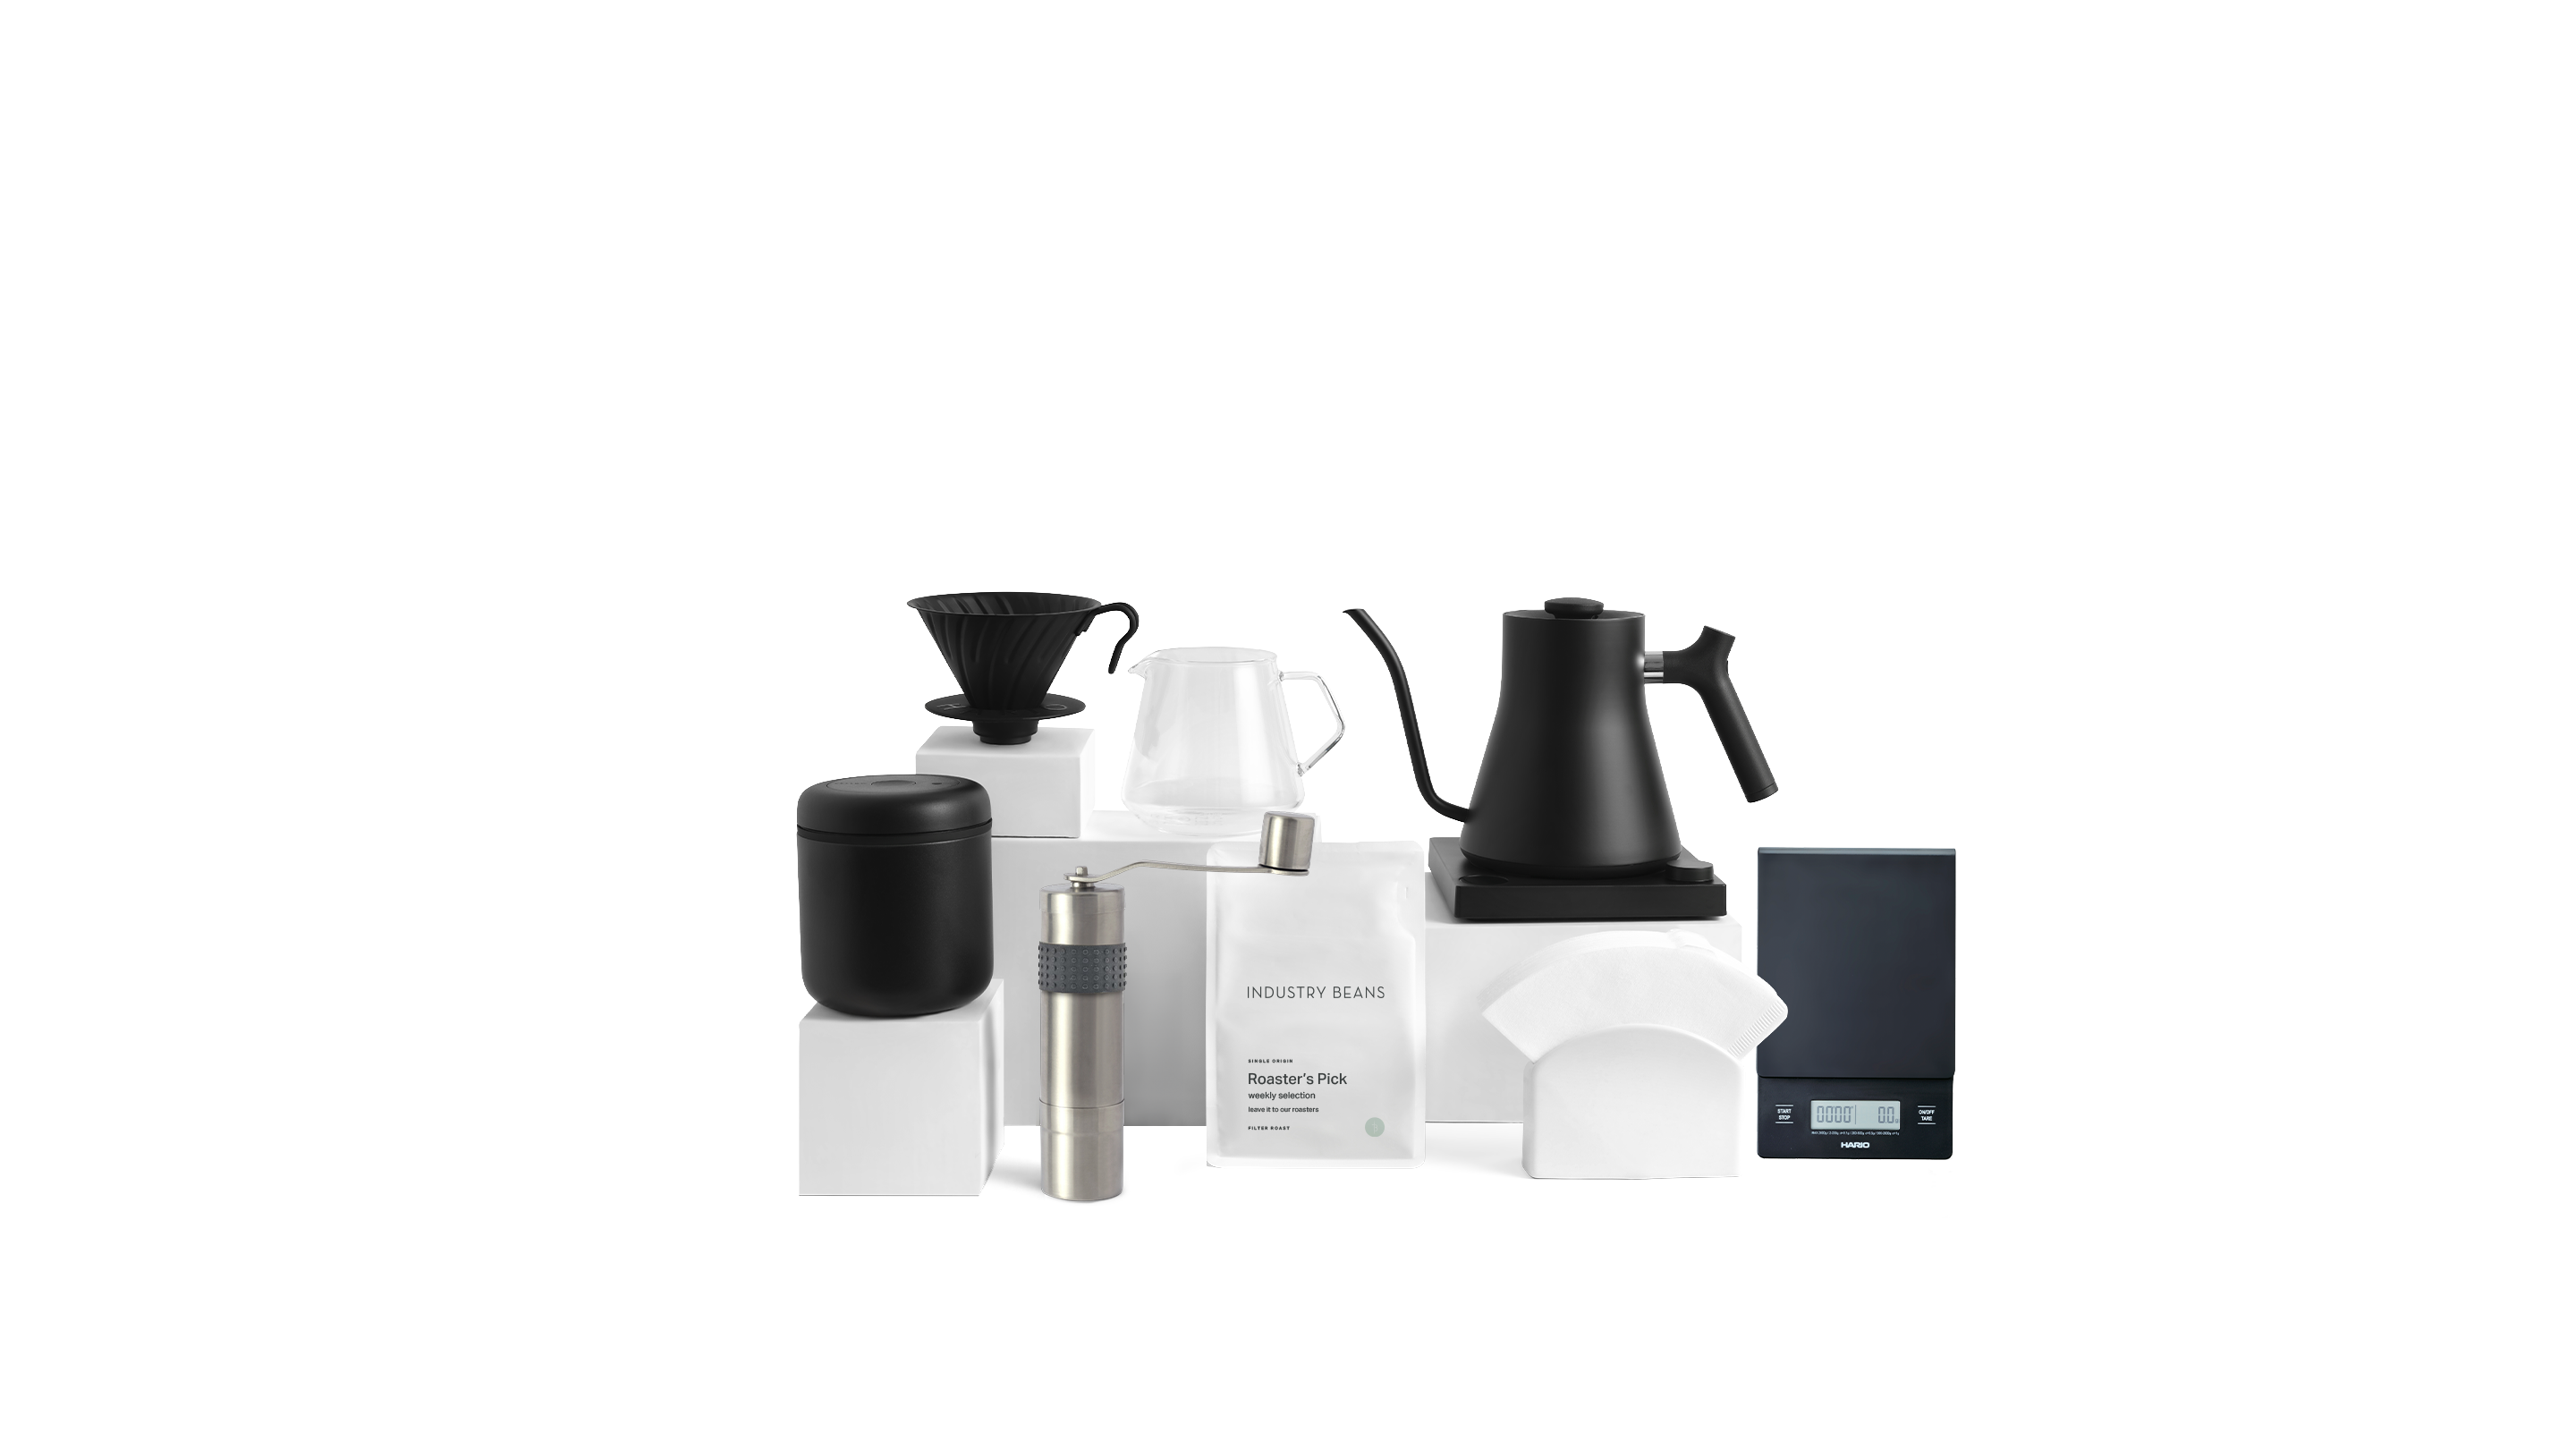 The Full Pourover Kit